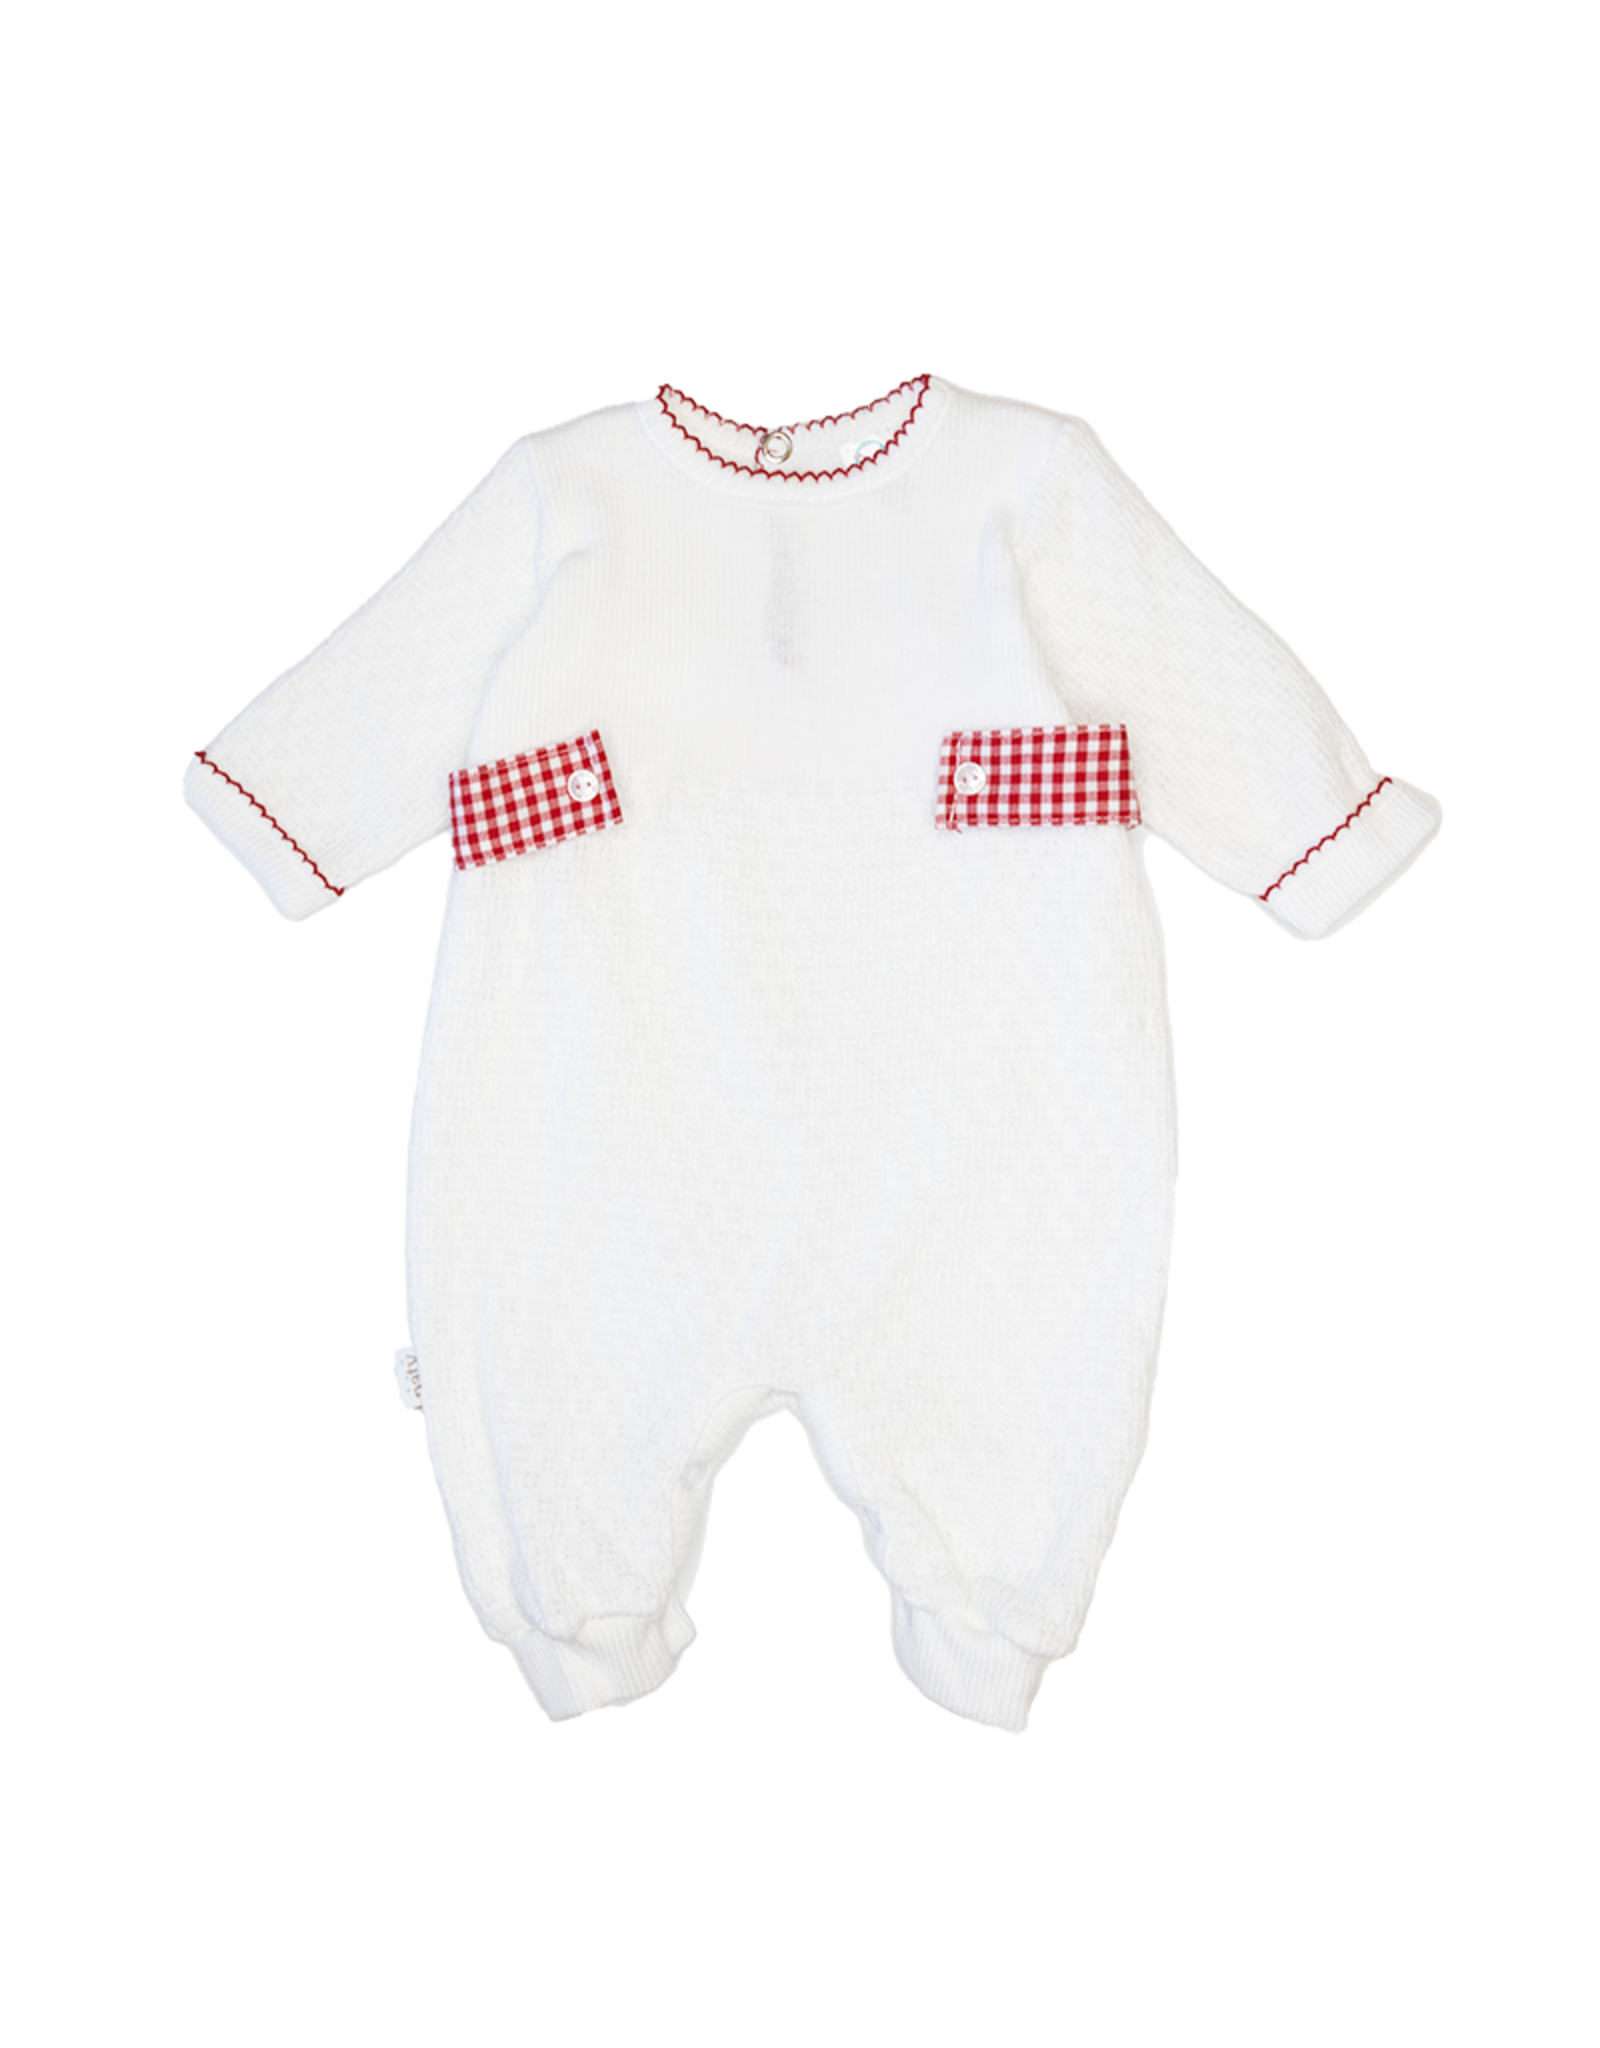 Paty, Inc. 166LSG Romper Gingham Red